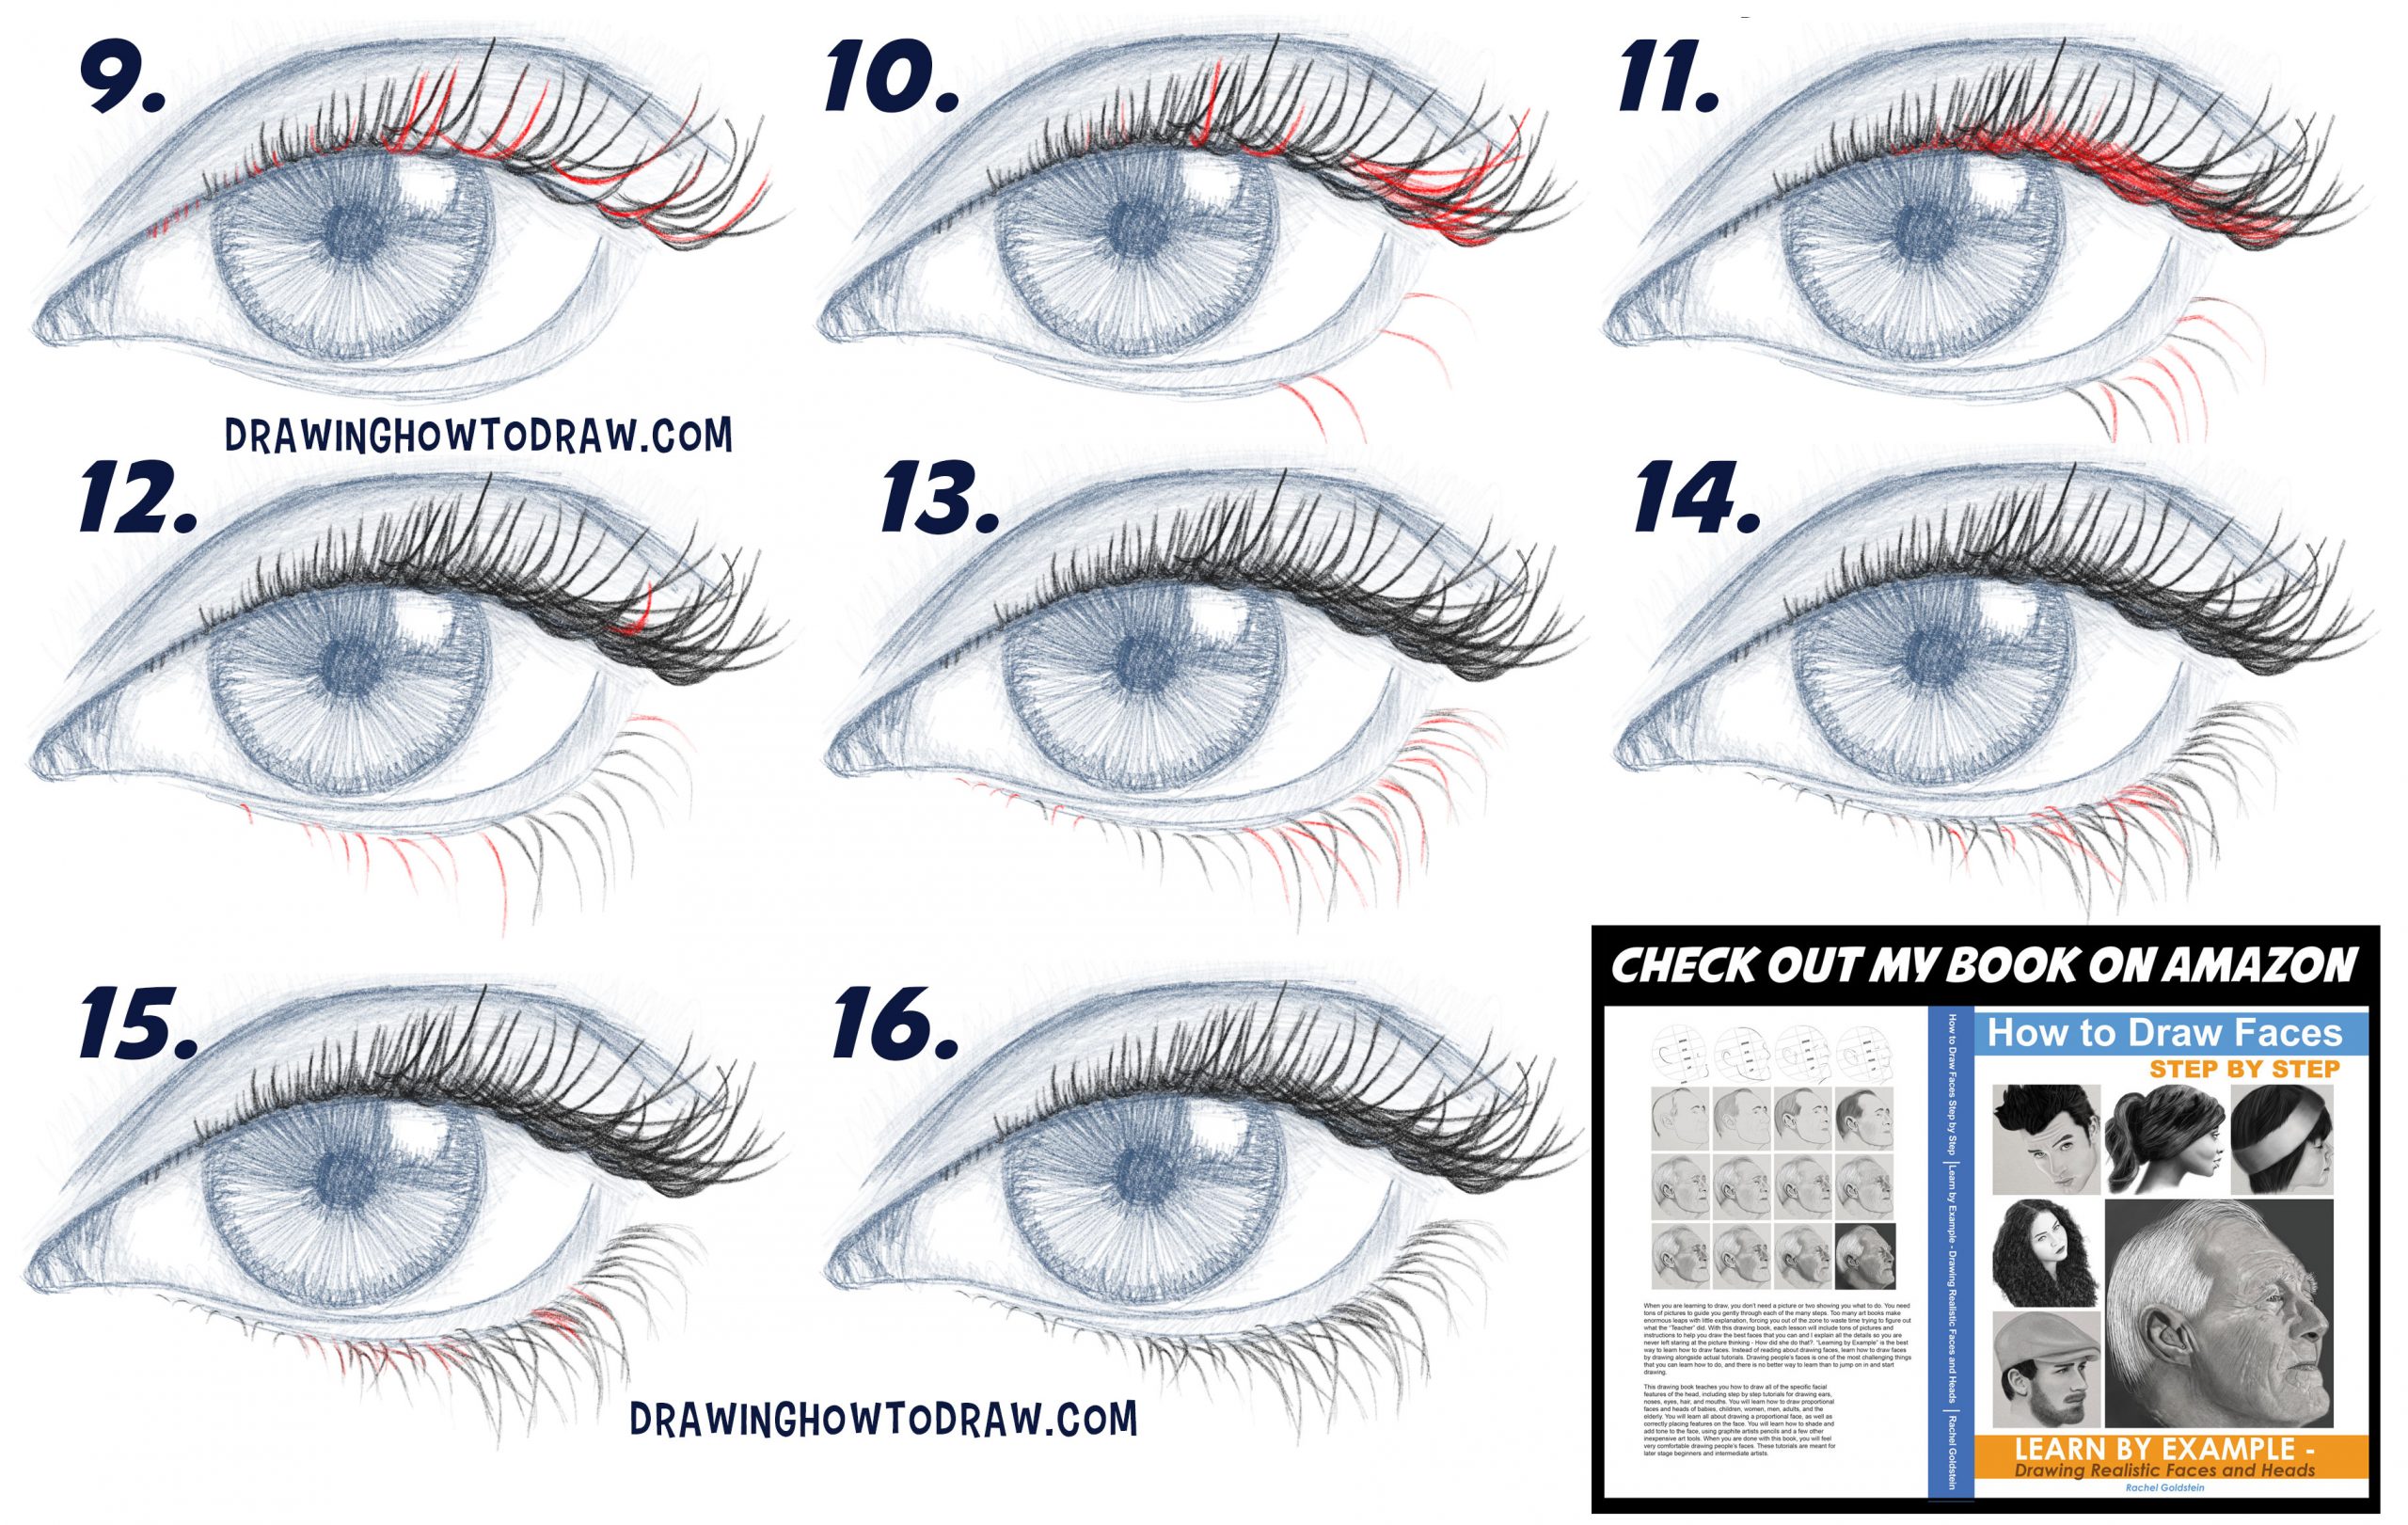 How To Draw Eyelashes Step By Step?